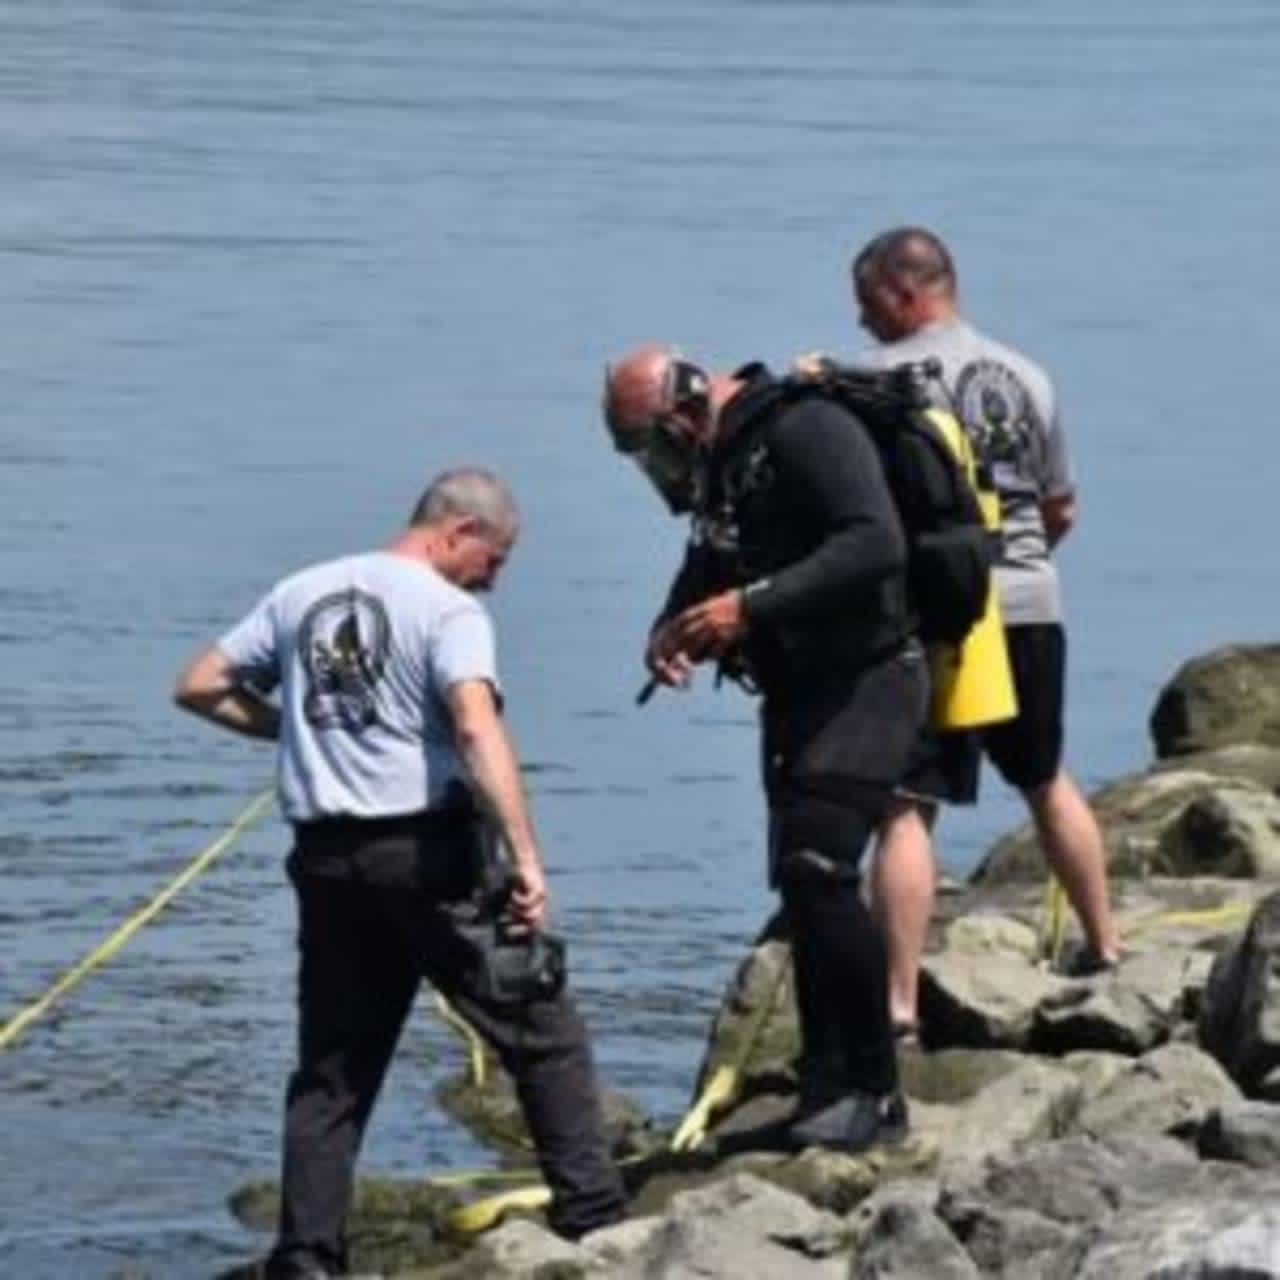 Diver's work to bring Brenda Kerber's vehicle to the surface from the bottom of the Muscott Reservoir.